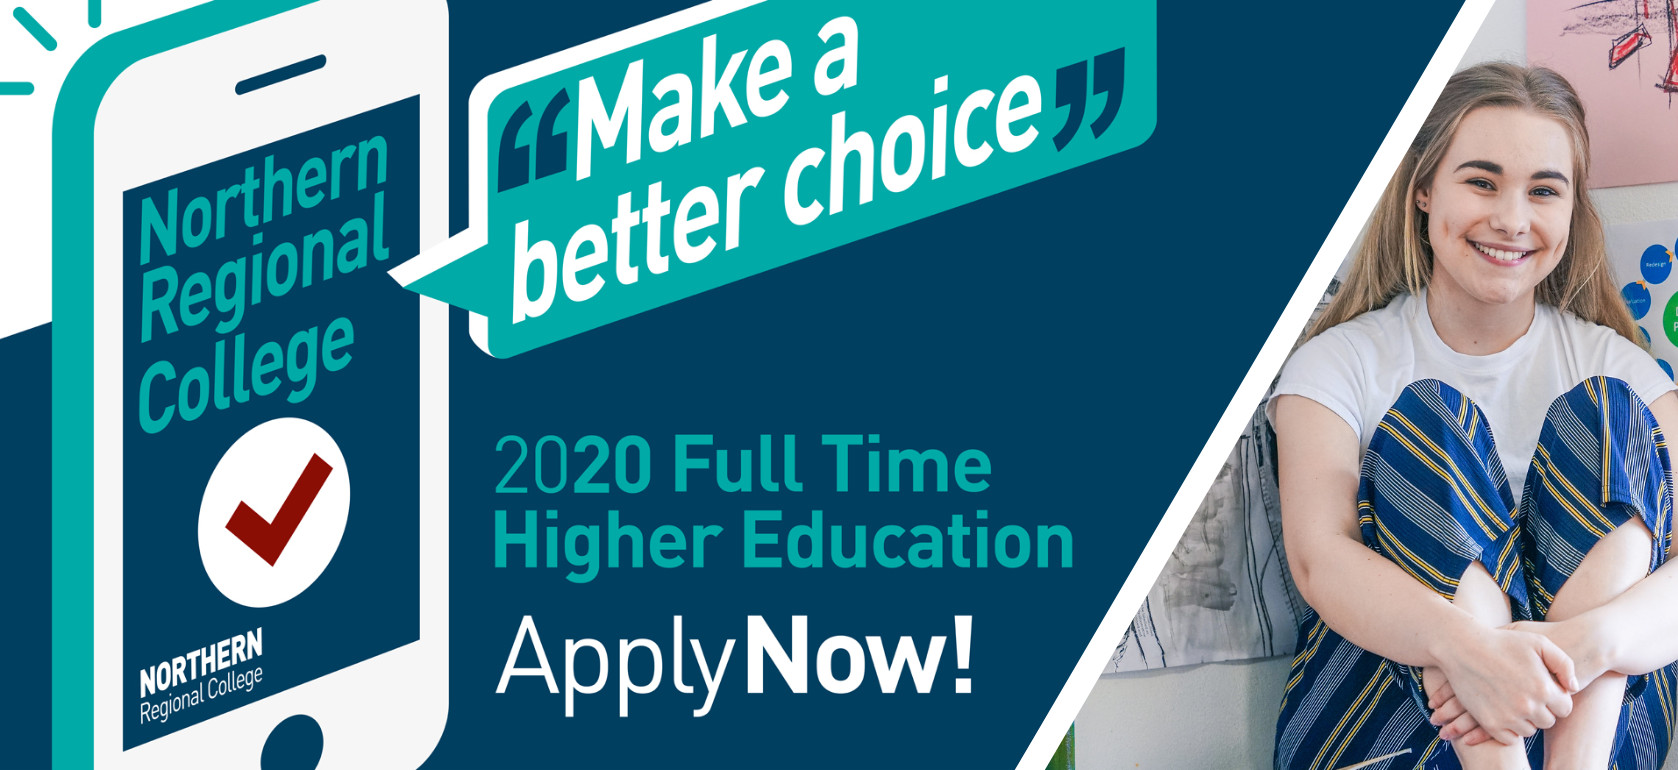 Applications for 2020 Full-time Higher Education courses are now available